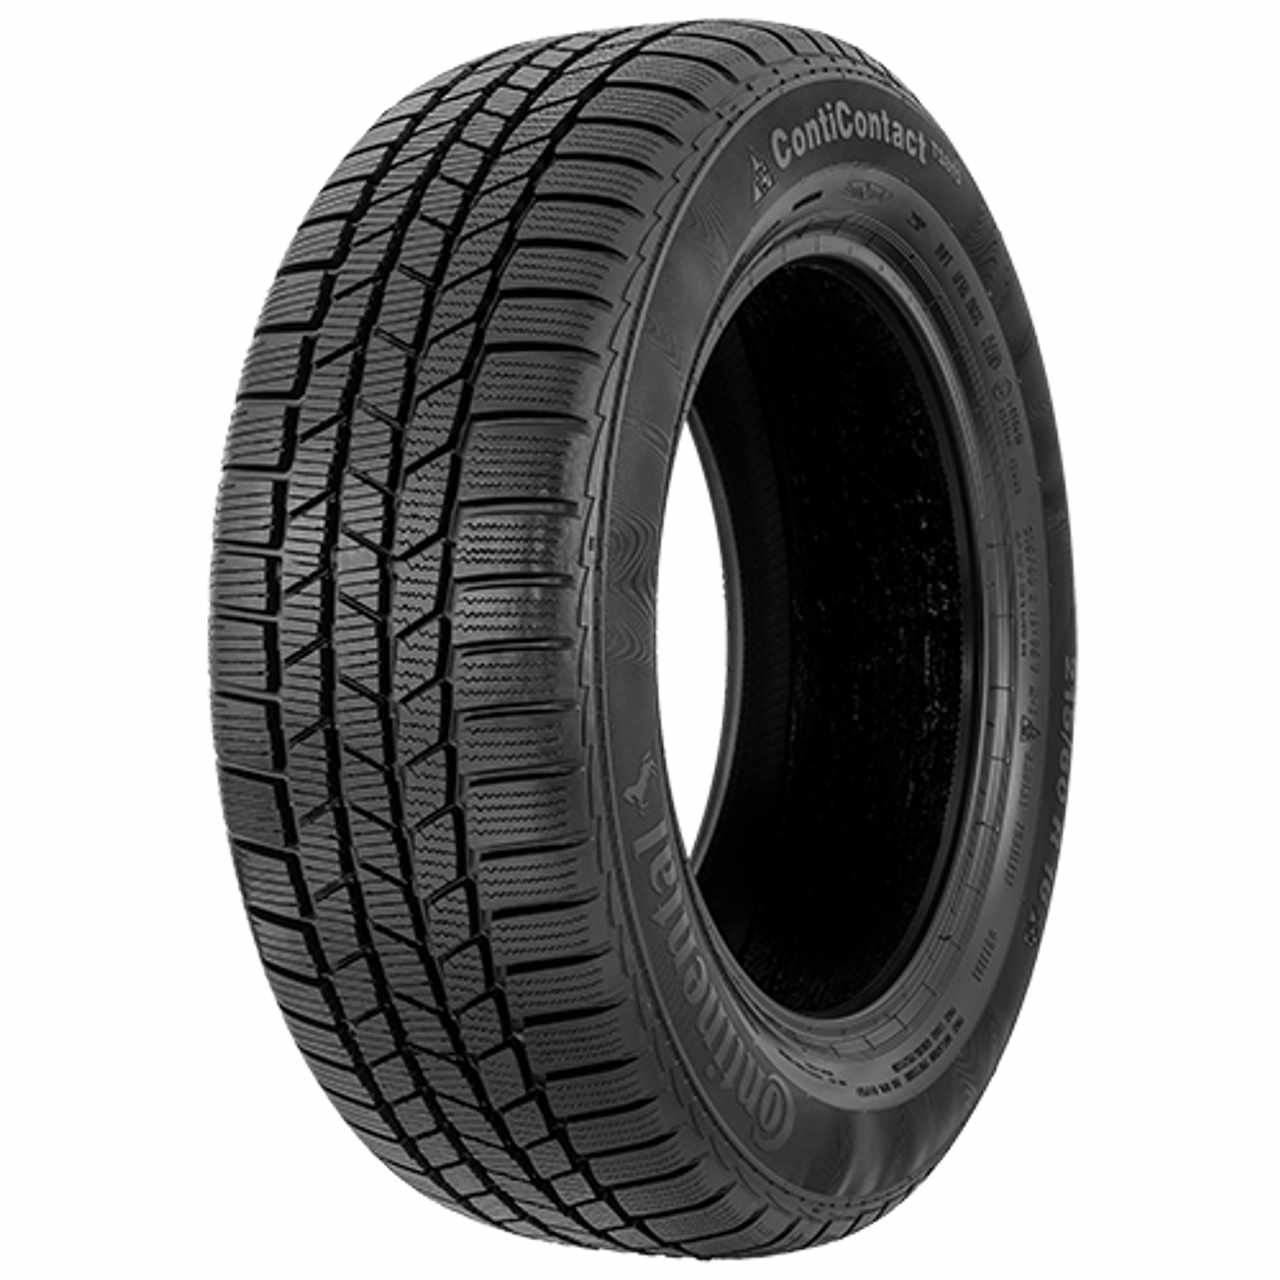 CONTINENTAL CONTICONTACT TS 815 205/50R17 93V BSW XL